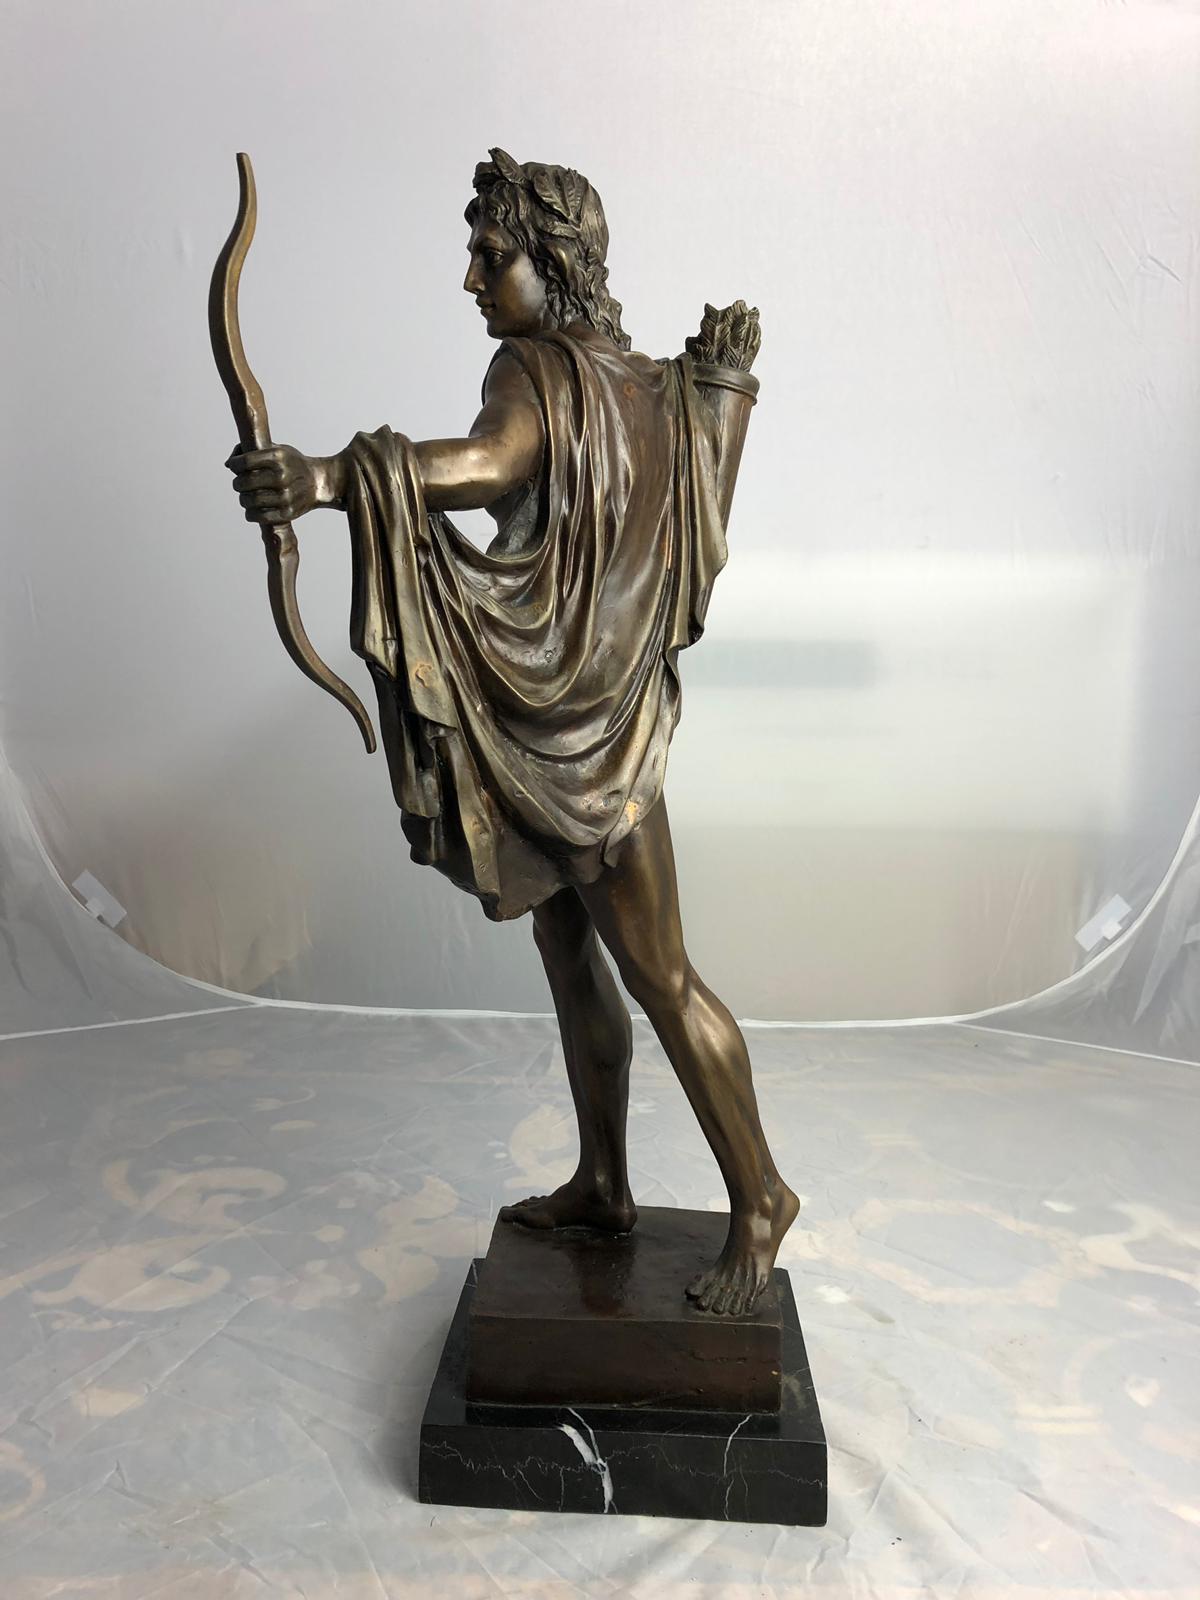 A 20th century bronze statue of Apollo the Greek god of archery.

Apollo (Attic, Ionic, and Homeric Greek: ?p?????, Apollo, is one of the most important and complex of the Olympian deities in classical Greek and Roman religion and Greek and Roman